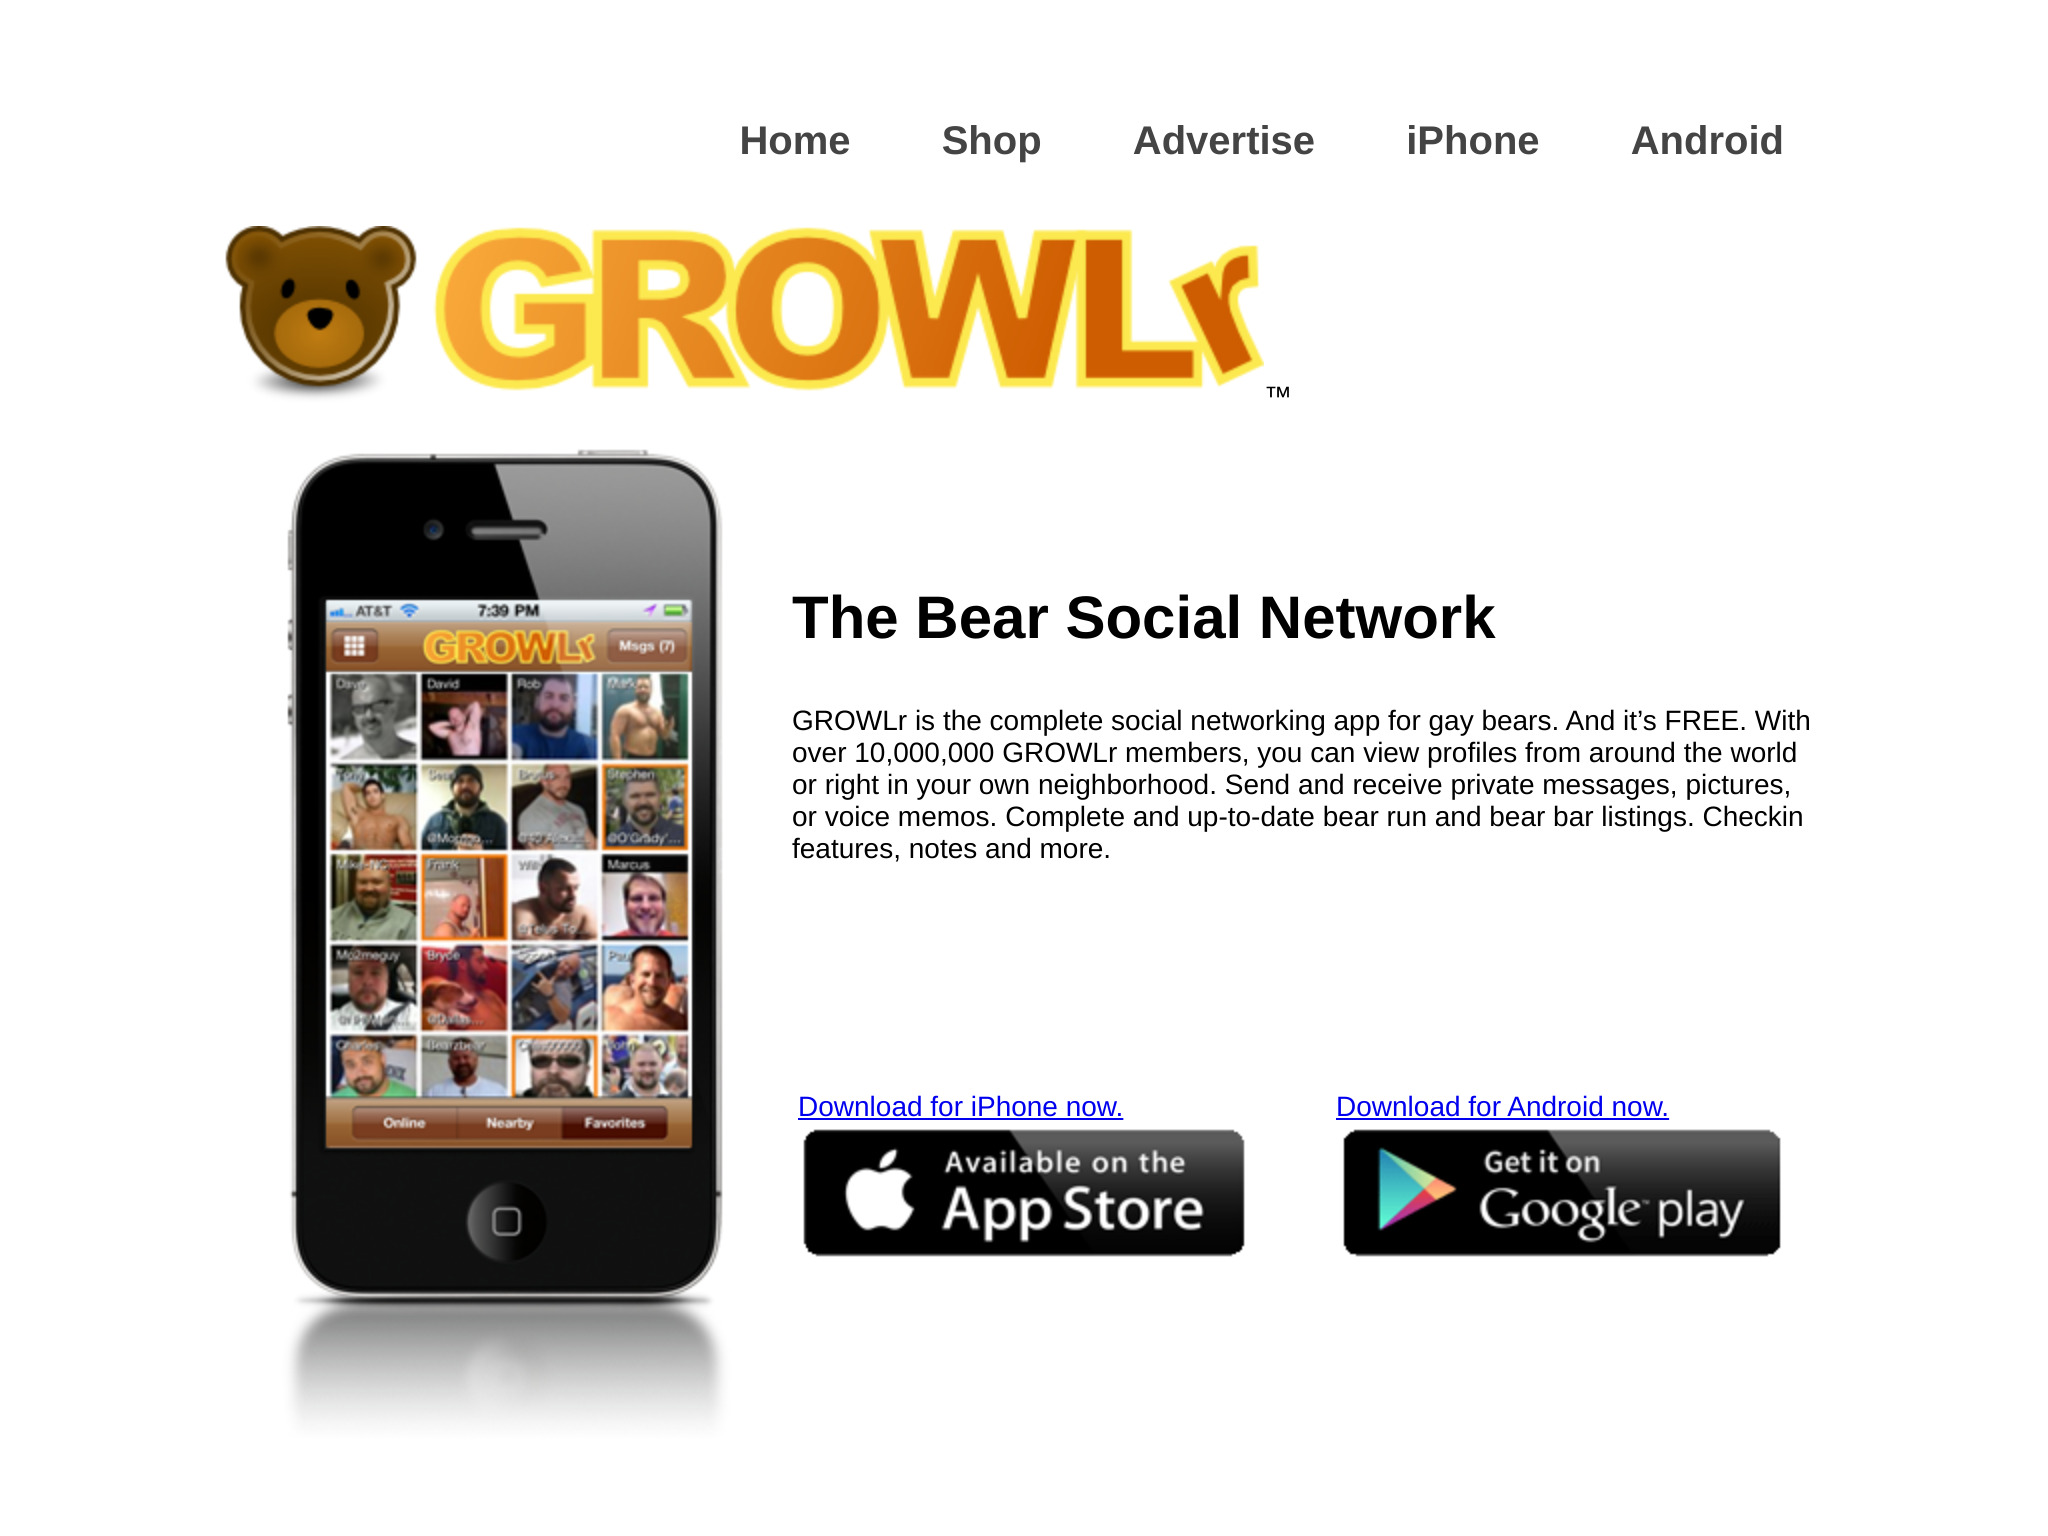 Growlr Review: What You Need to Know